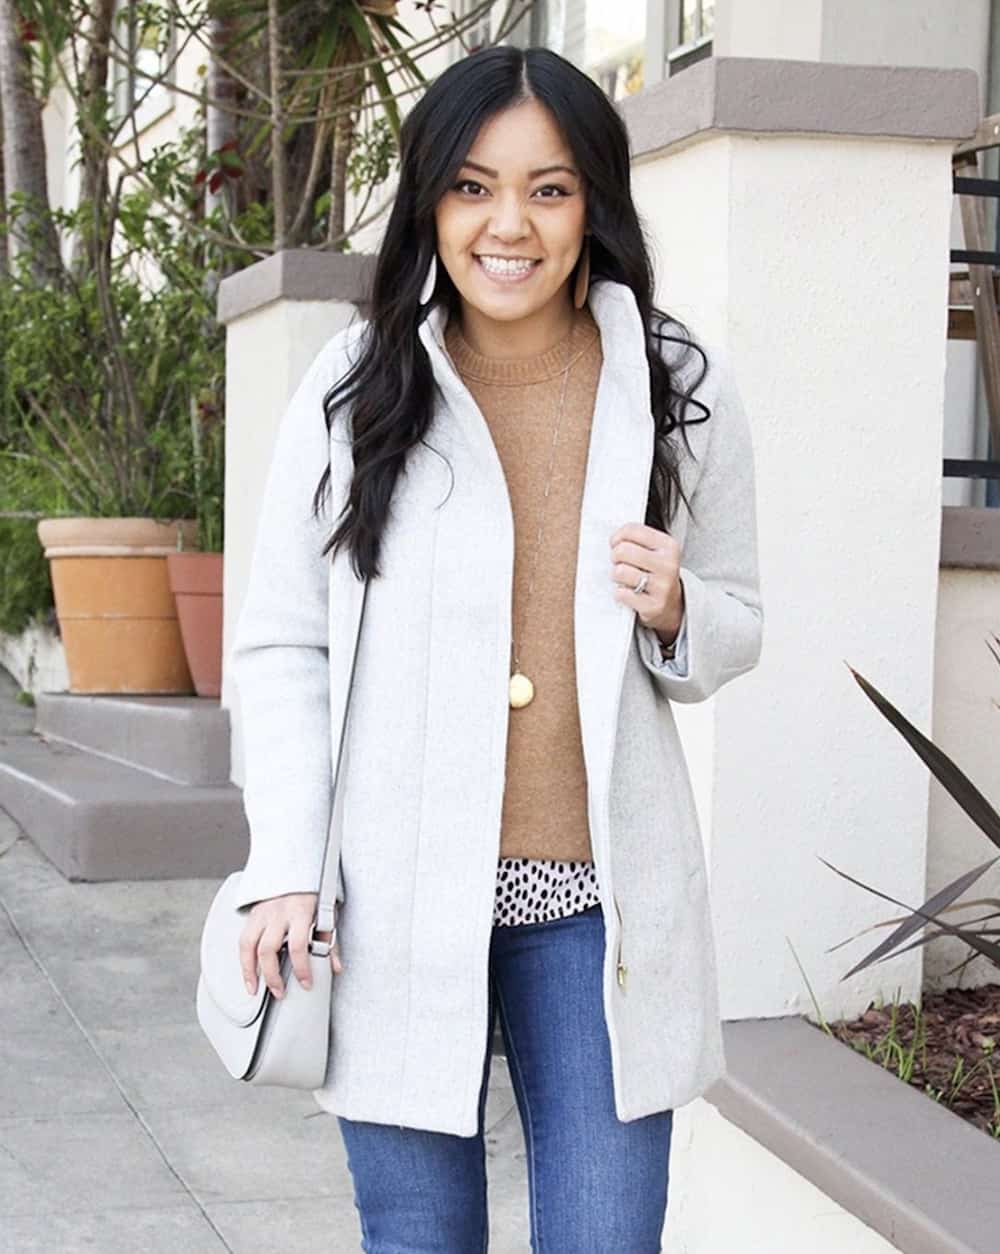 Woman wearing a white coat, brown sweater and jeans.